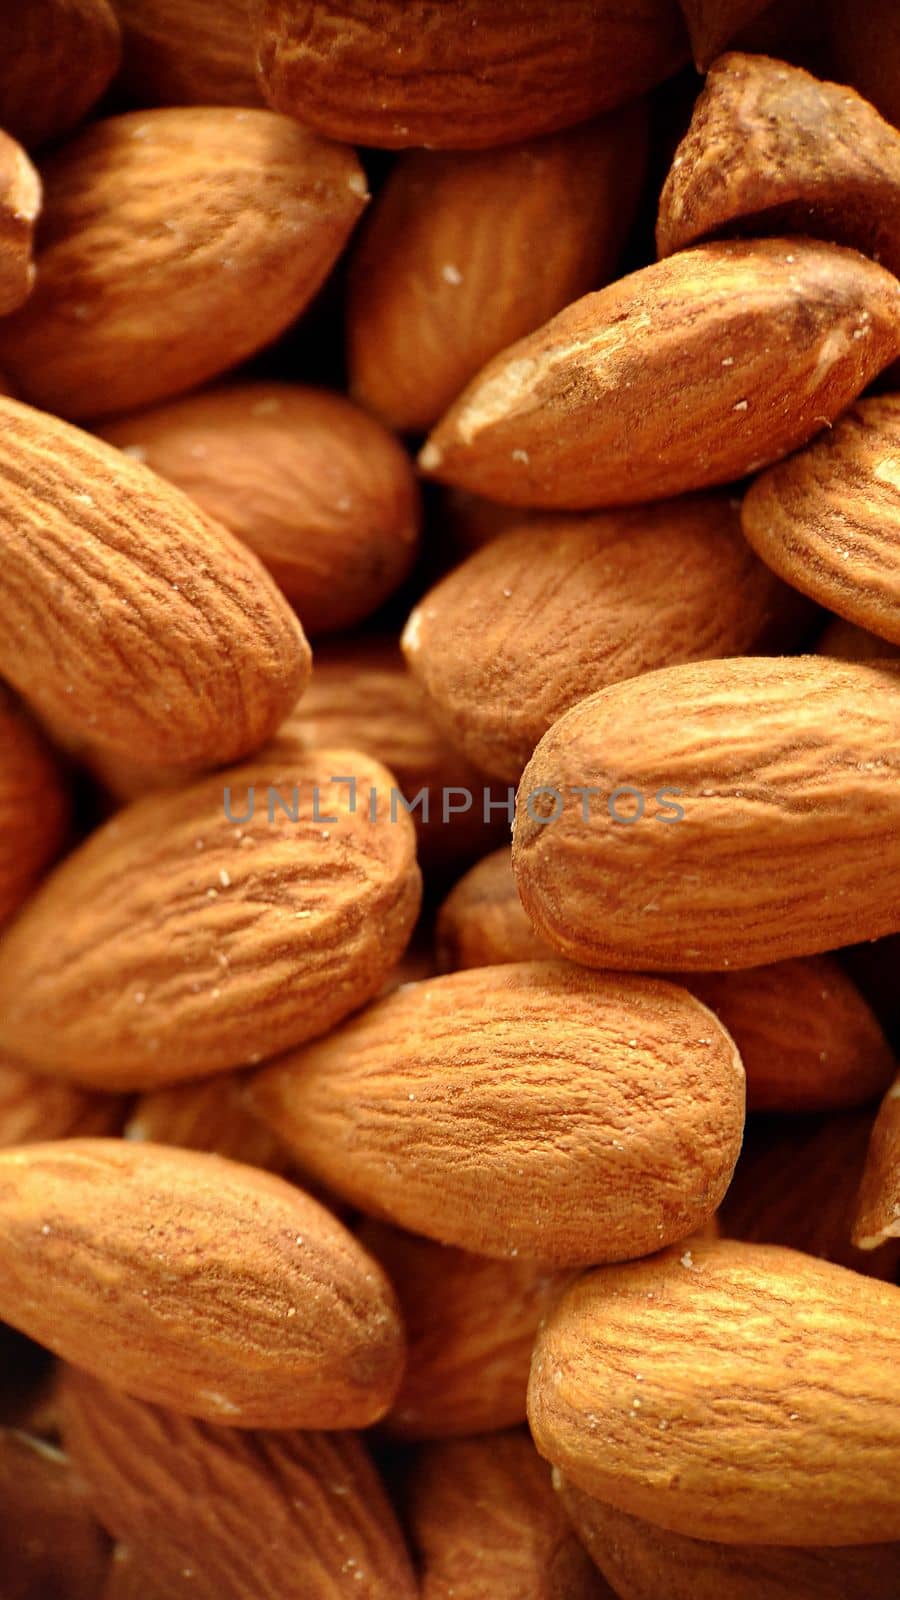 Almond background image close-up selective focus by Mastak80